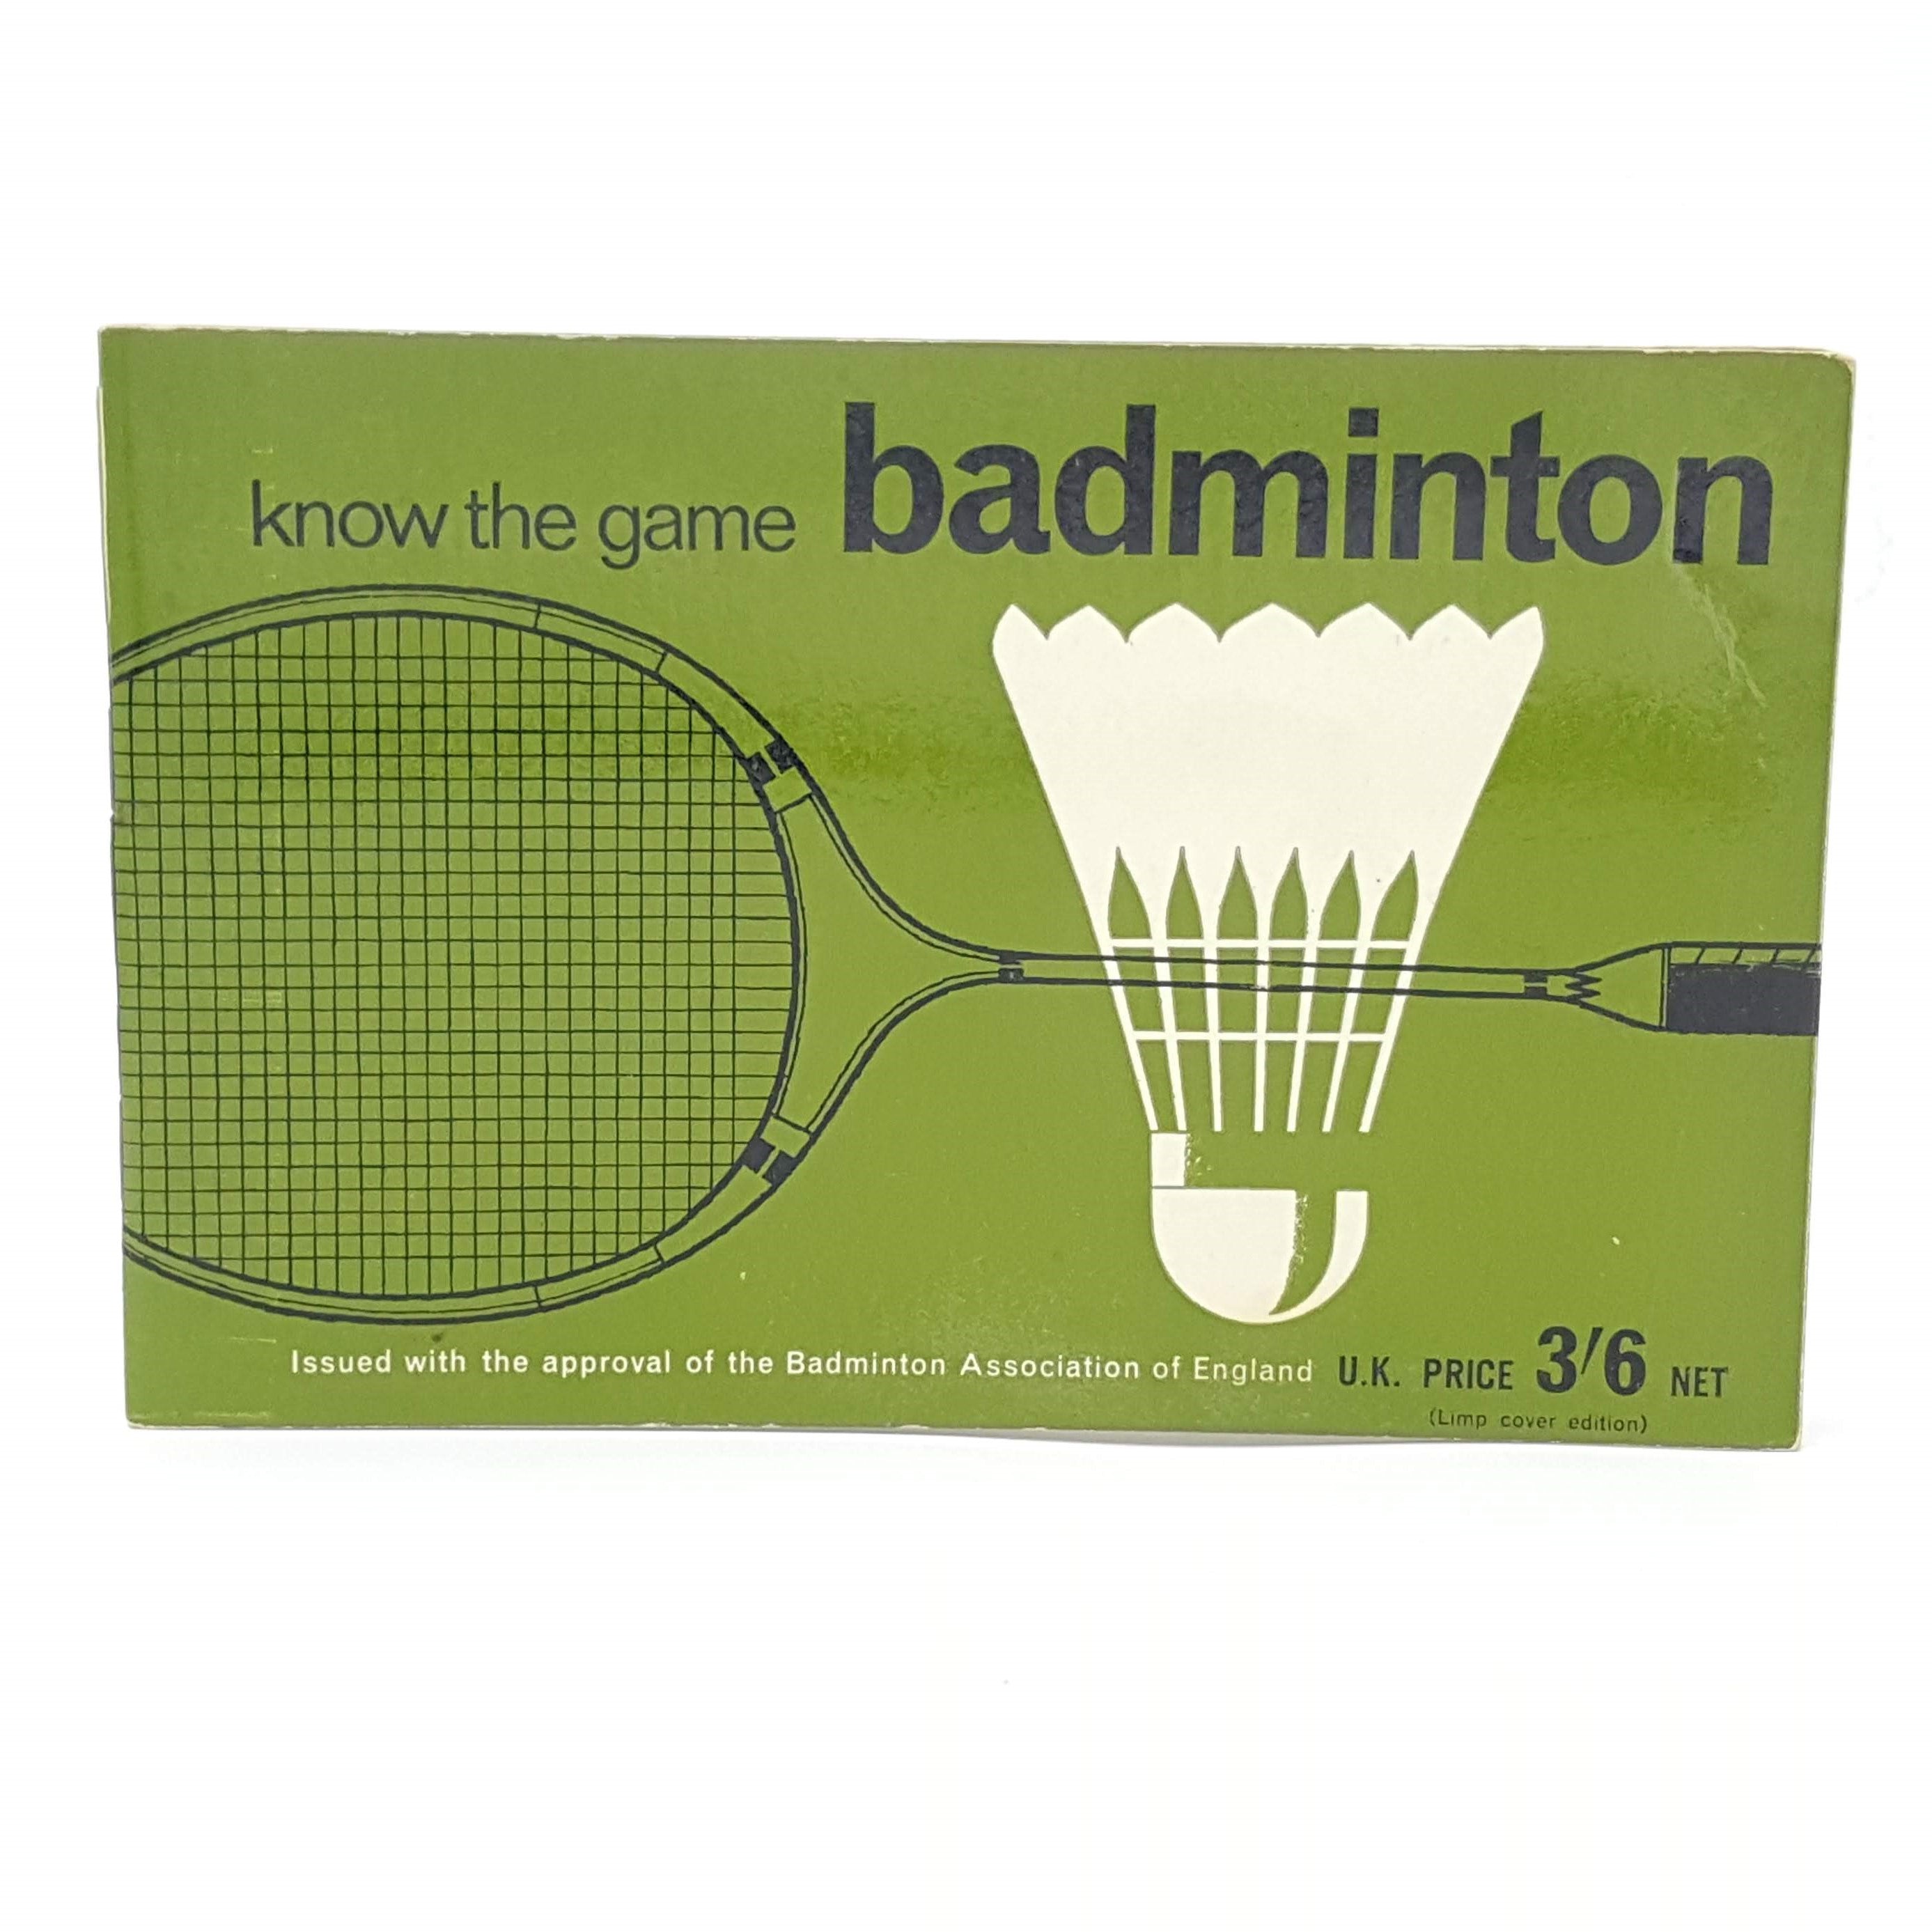 BADMINTON: KNOW THE GAME 1980